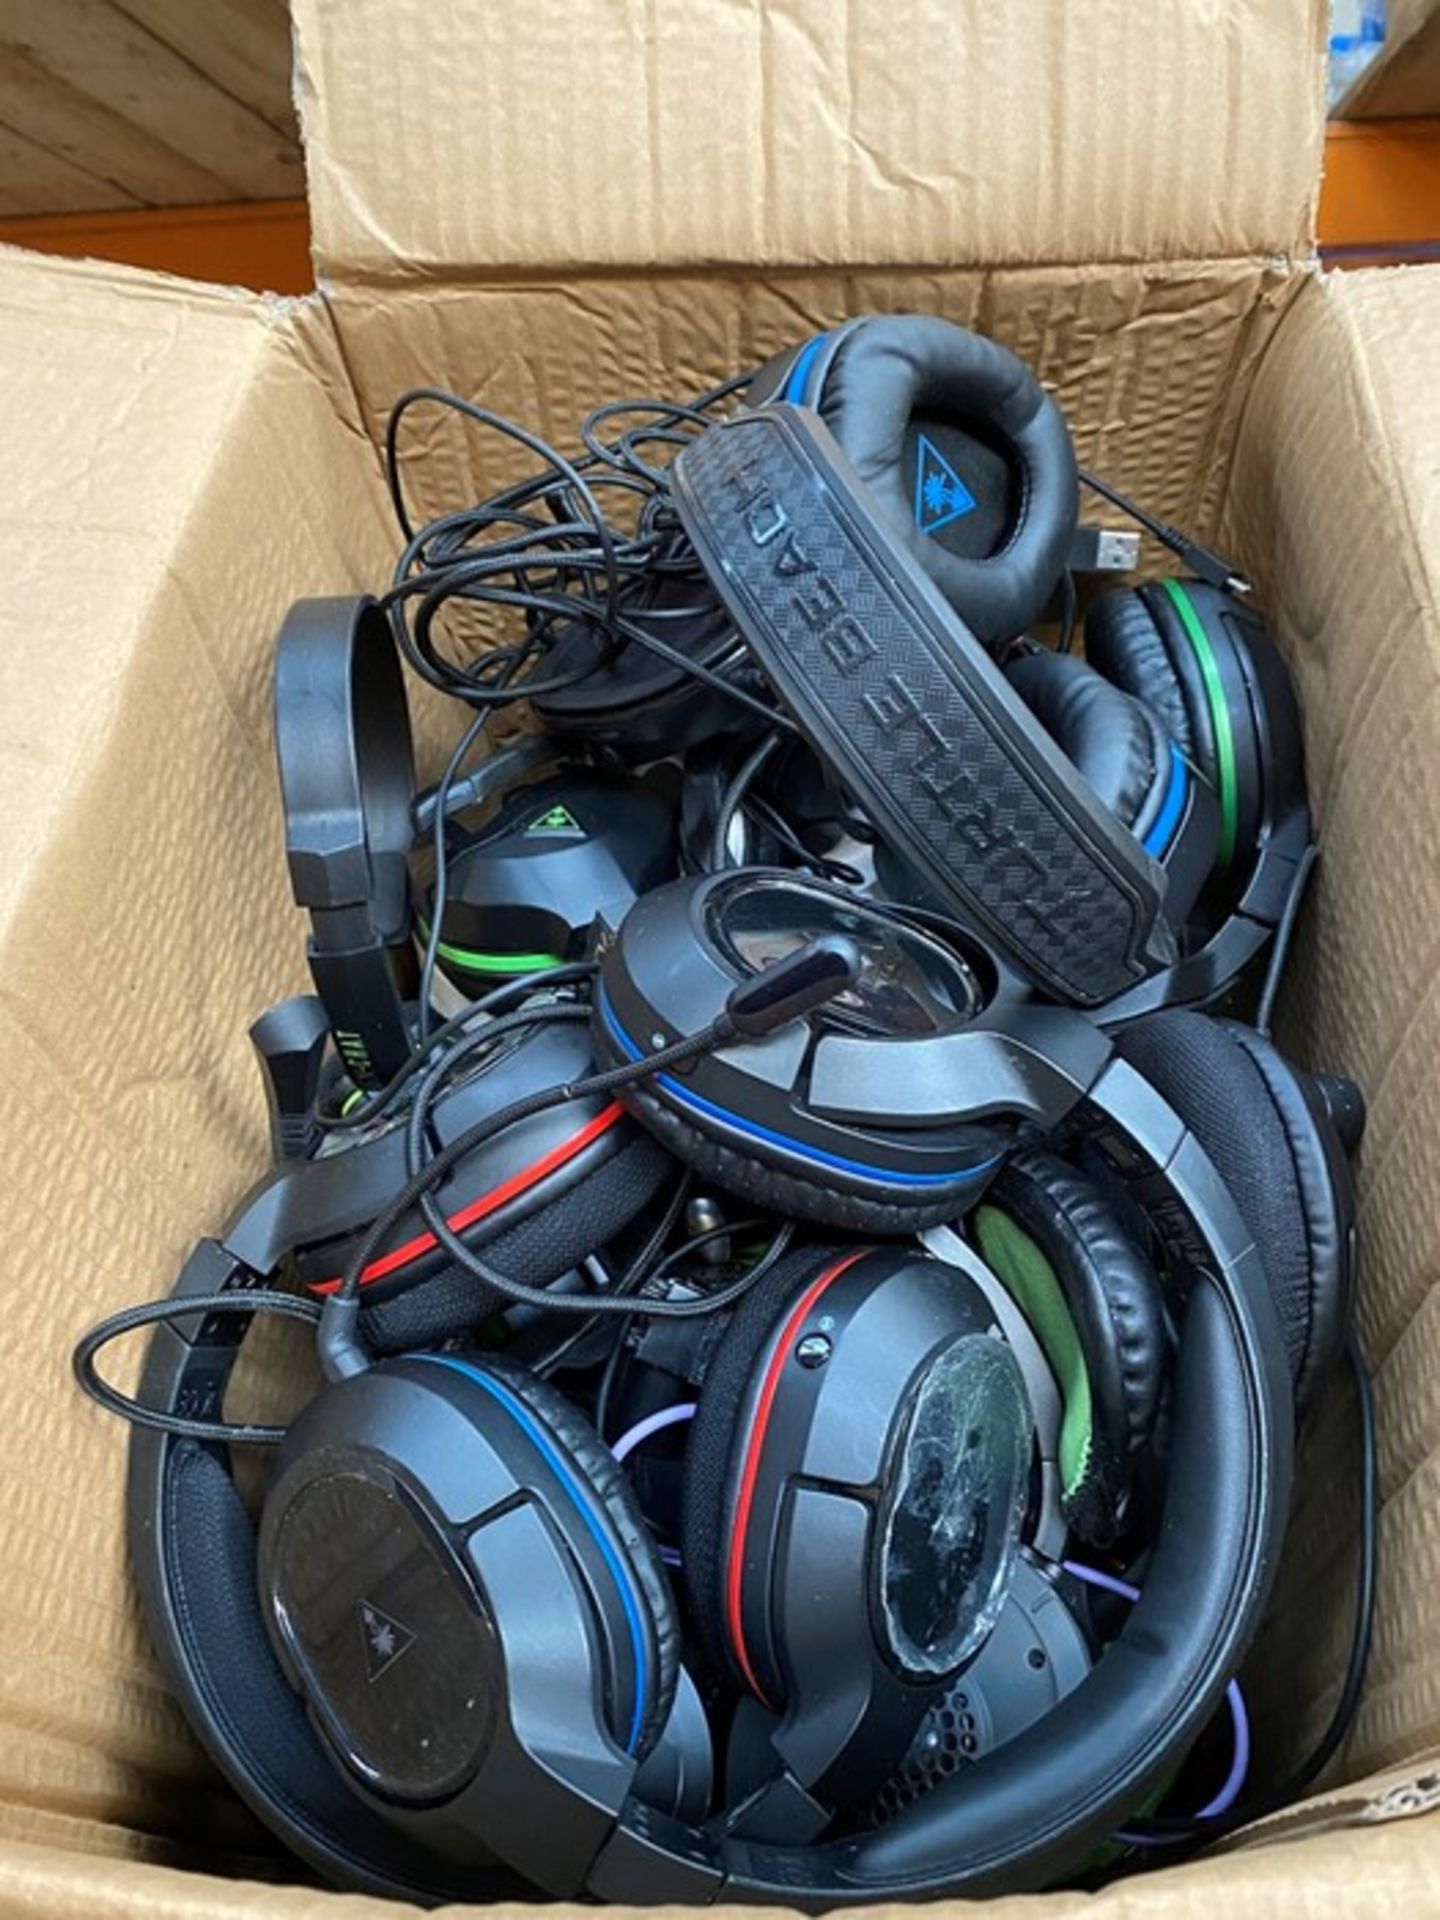 ONE LOT TO CONTAIN APPROXIMATELY 20 DIFFERENT TURTLE BEACH HEADSETS COLOURS AND CONDITIONS MAY VARY,